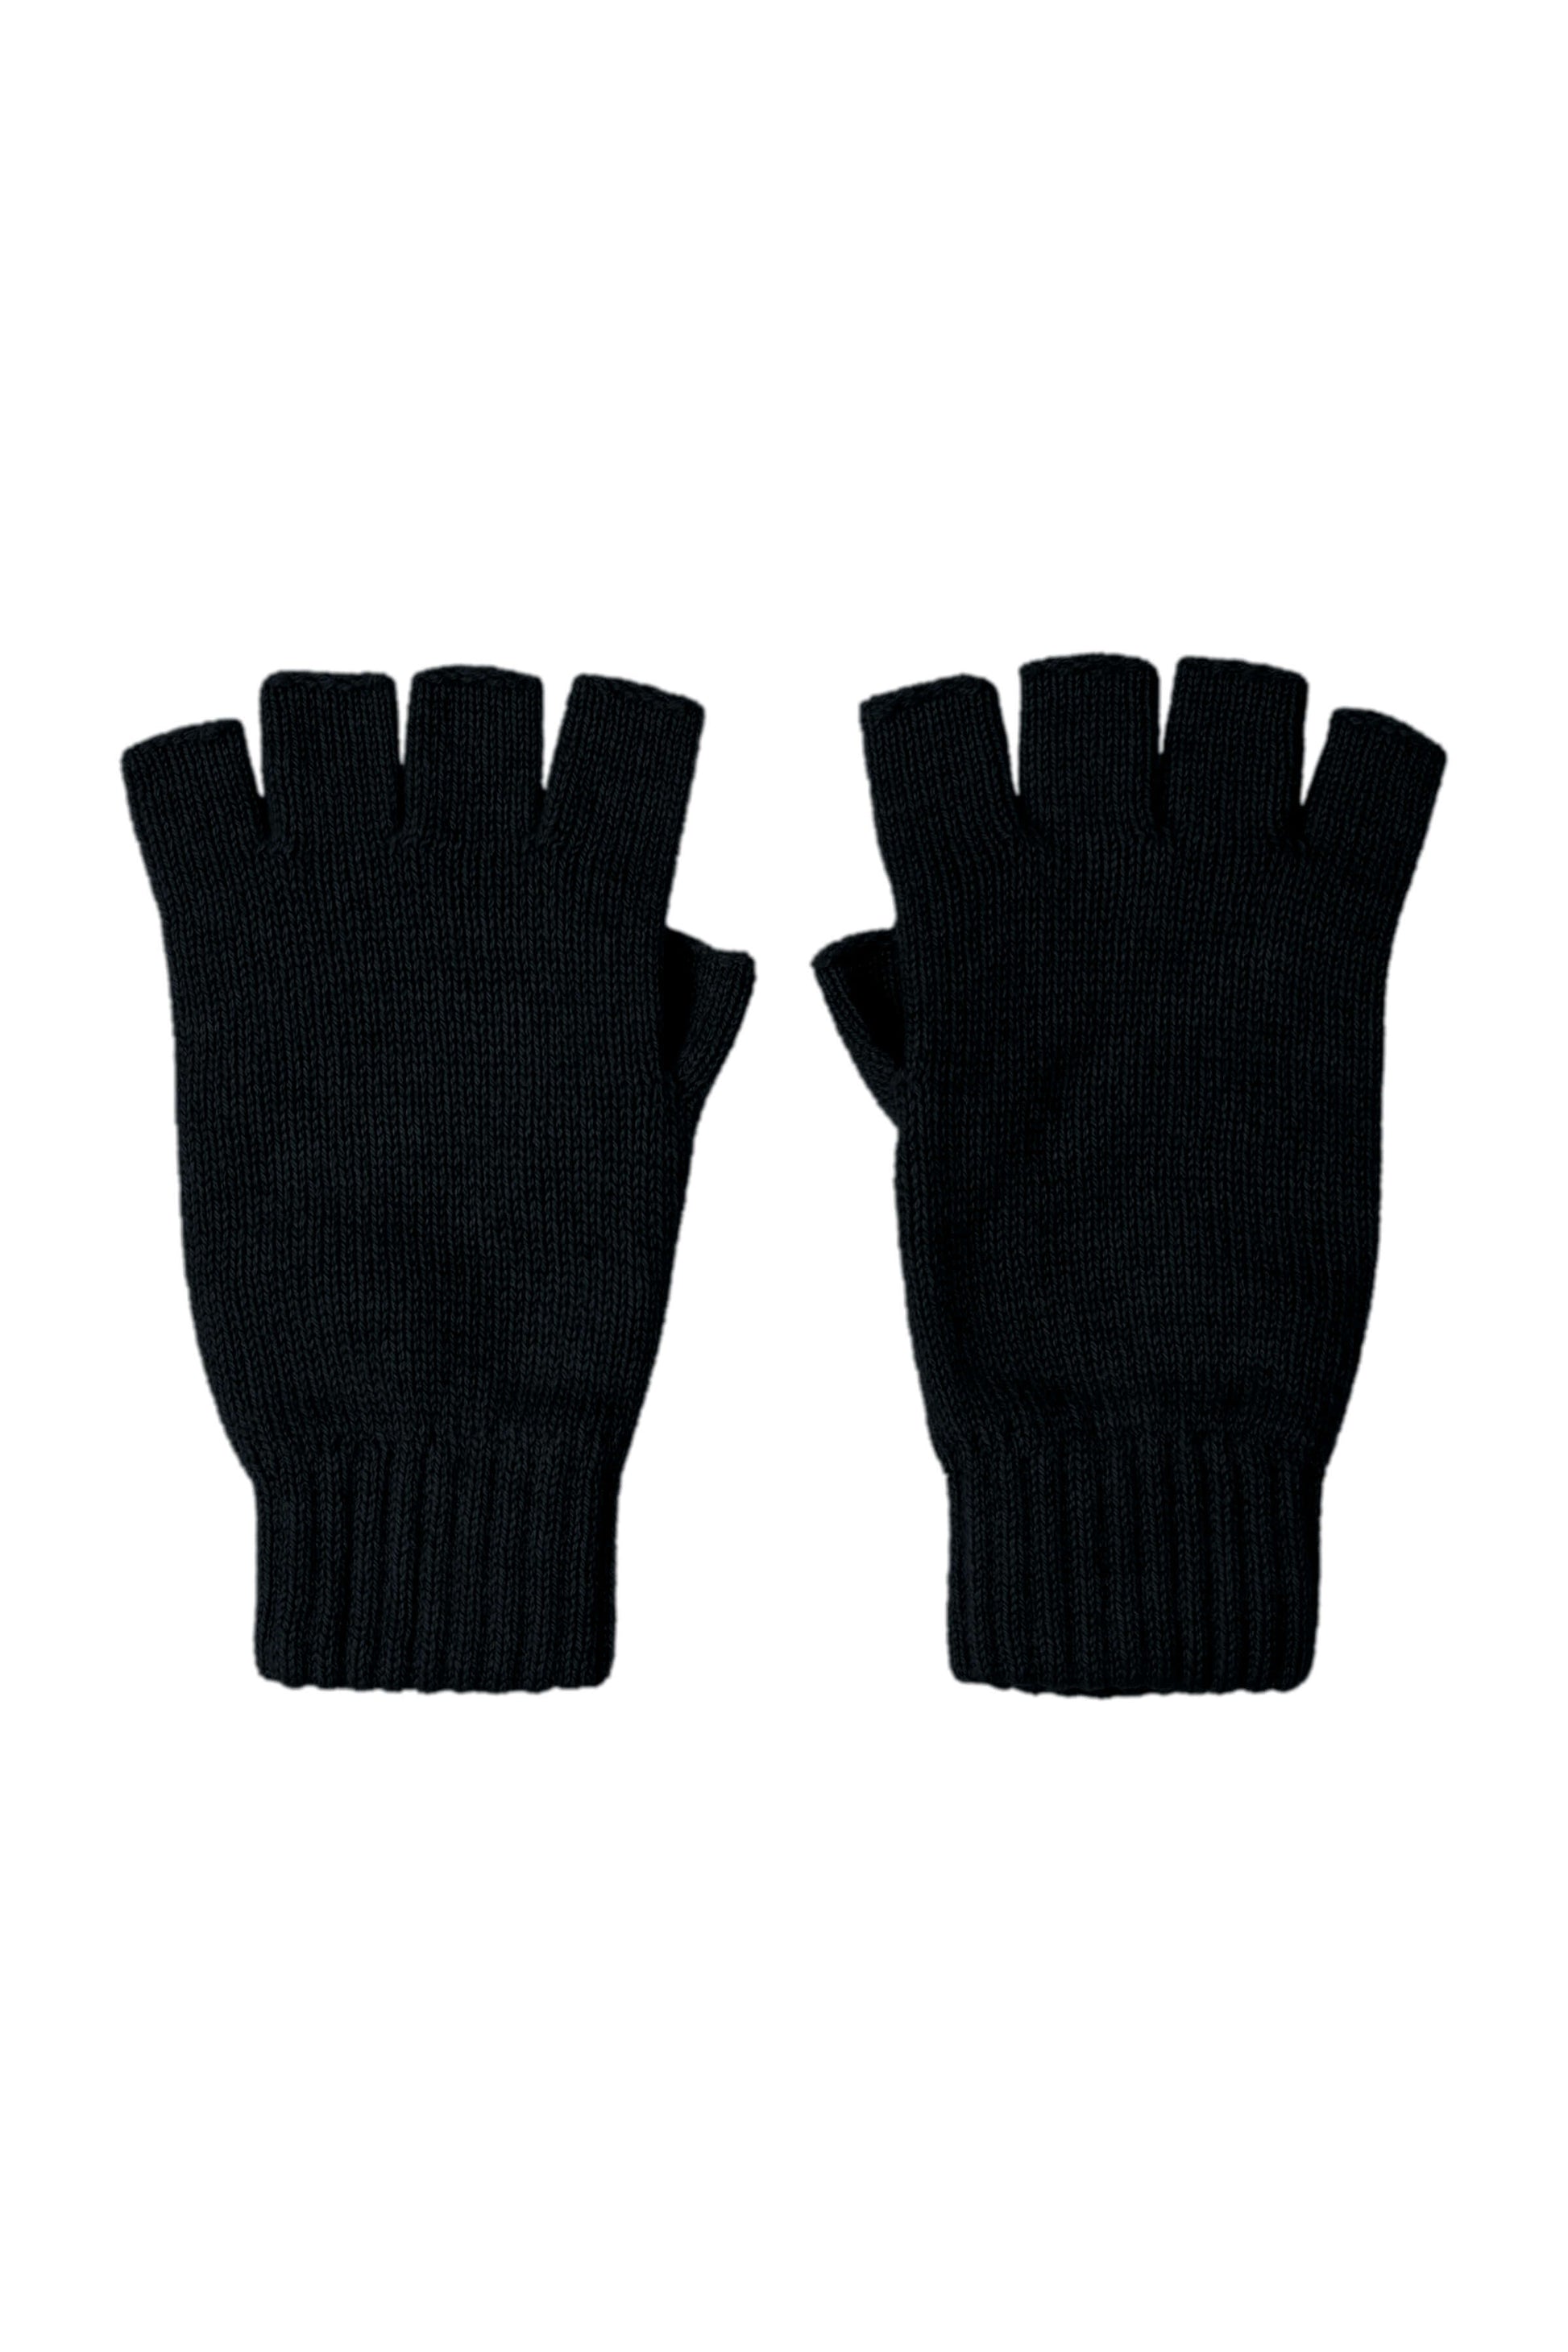 Johnstons of Elgin AW24 Knitted Accessory Black Women's Fingerless Cashmere Gloves HAY02223SA0900N/A